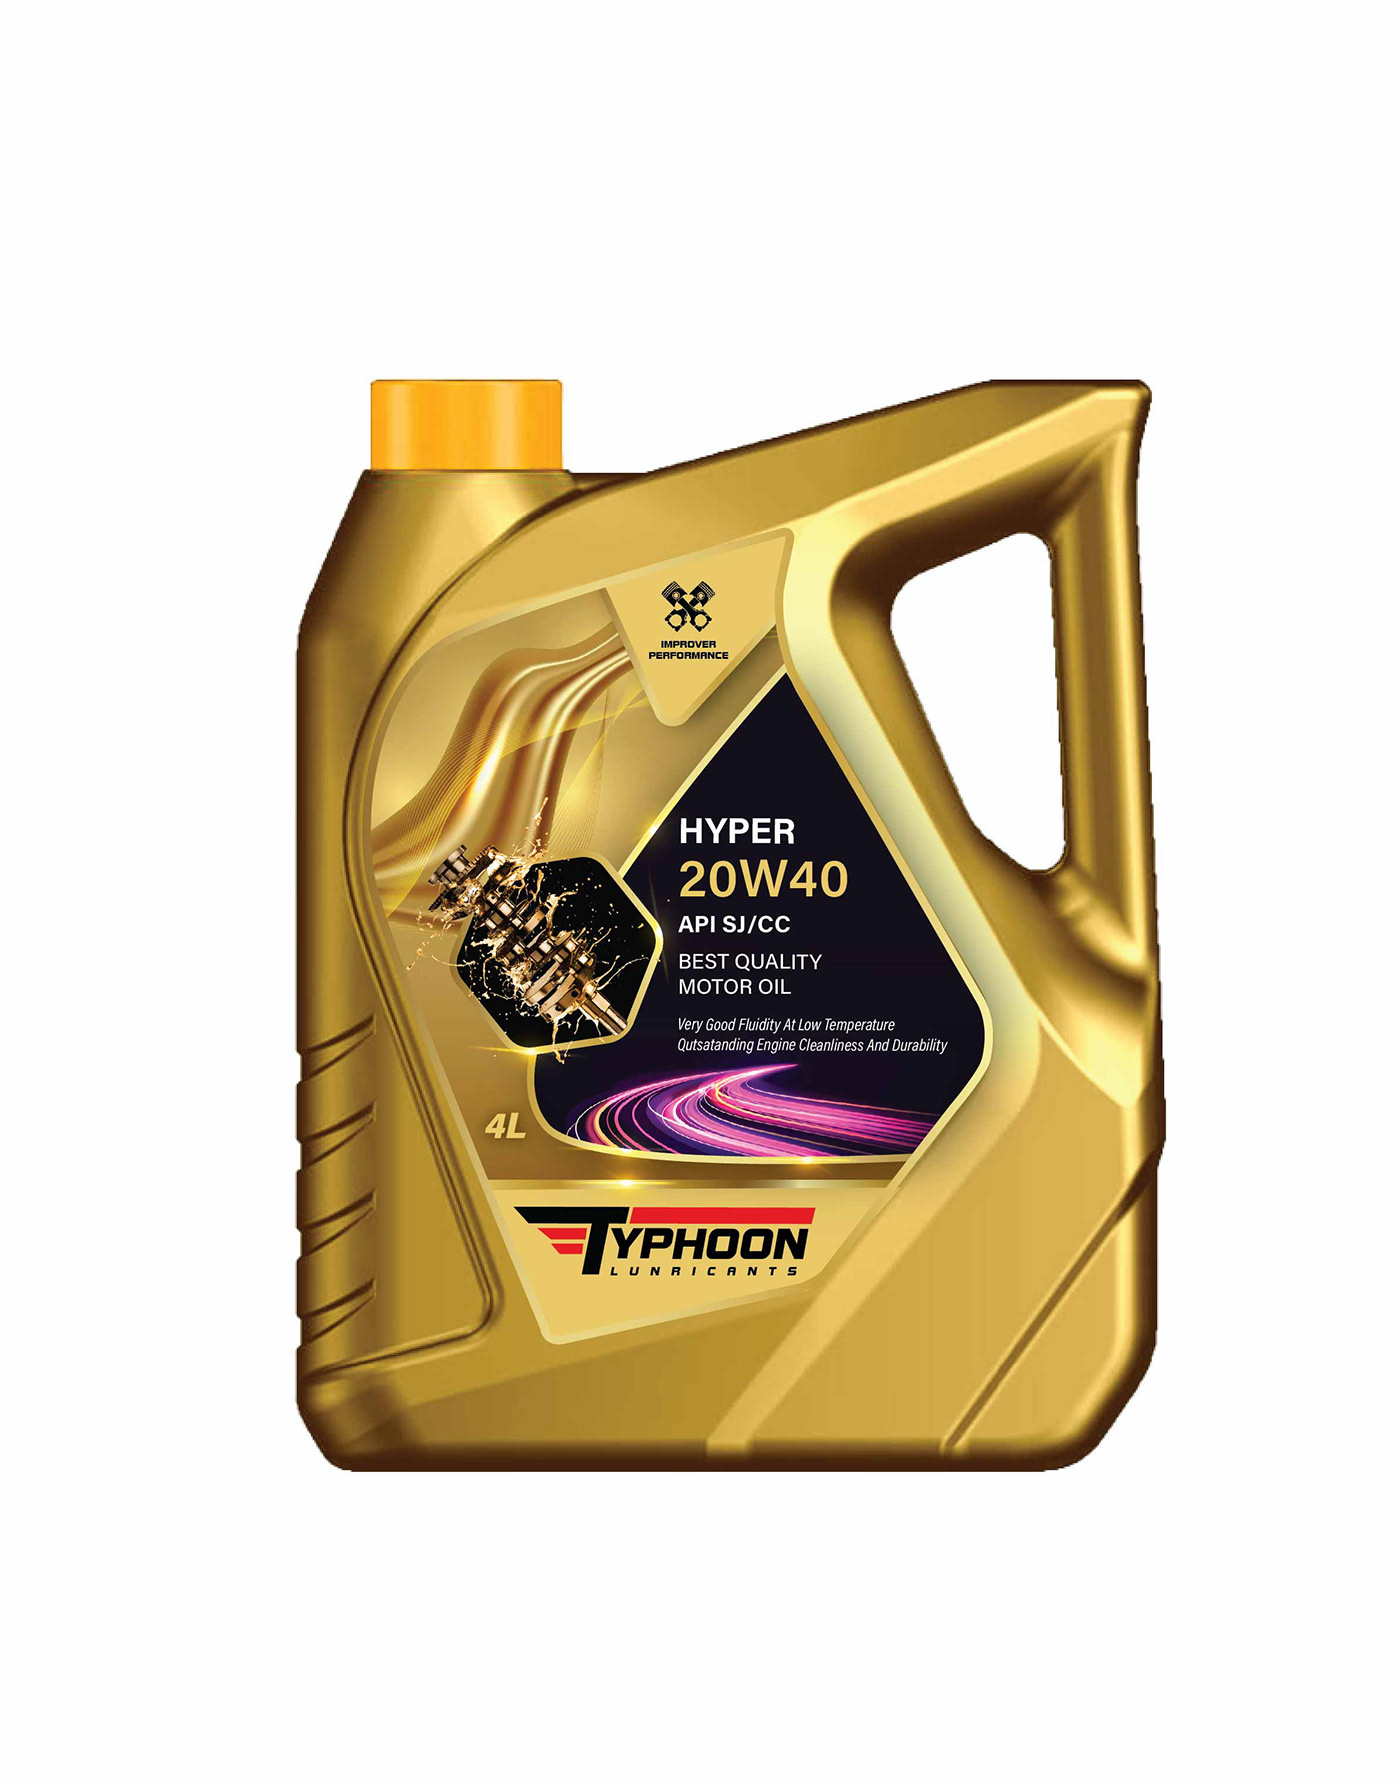 graphic Lubricants Engine oil Can Design